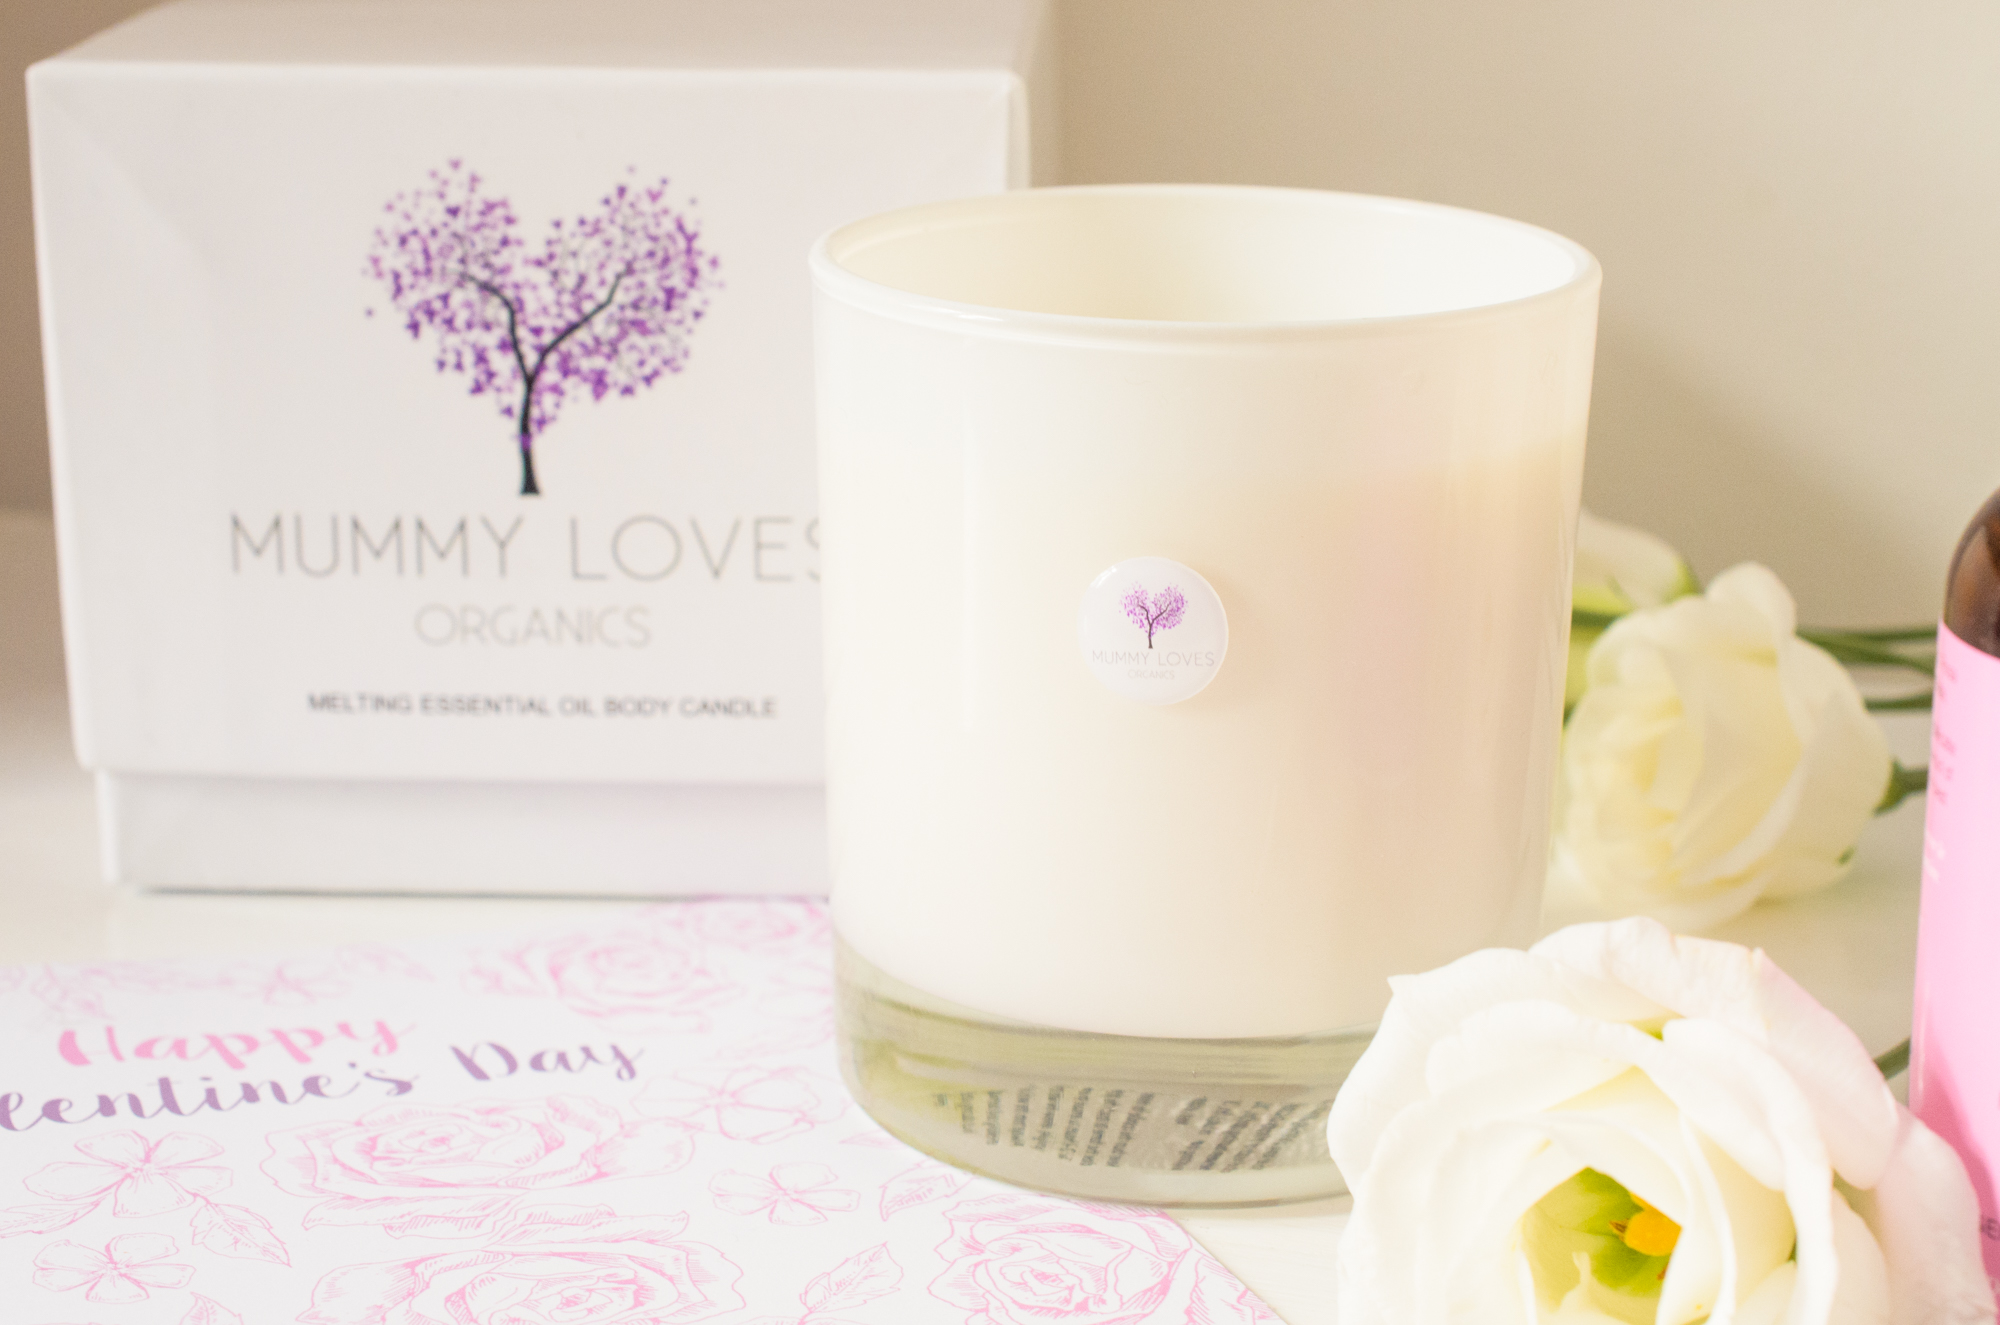 Melting Body Candle in Romance from Mummy Loves Organics